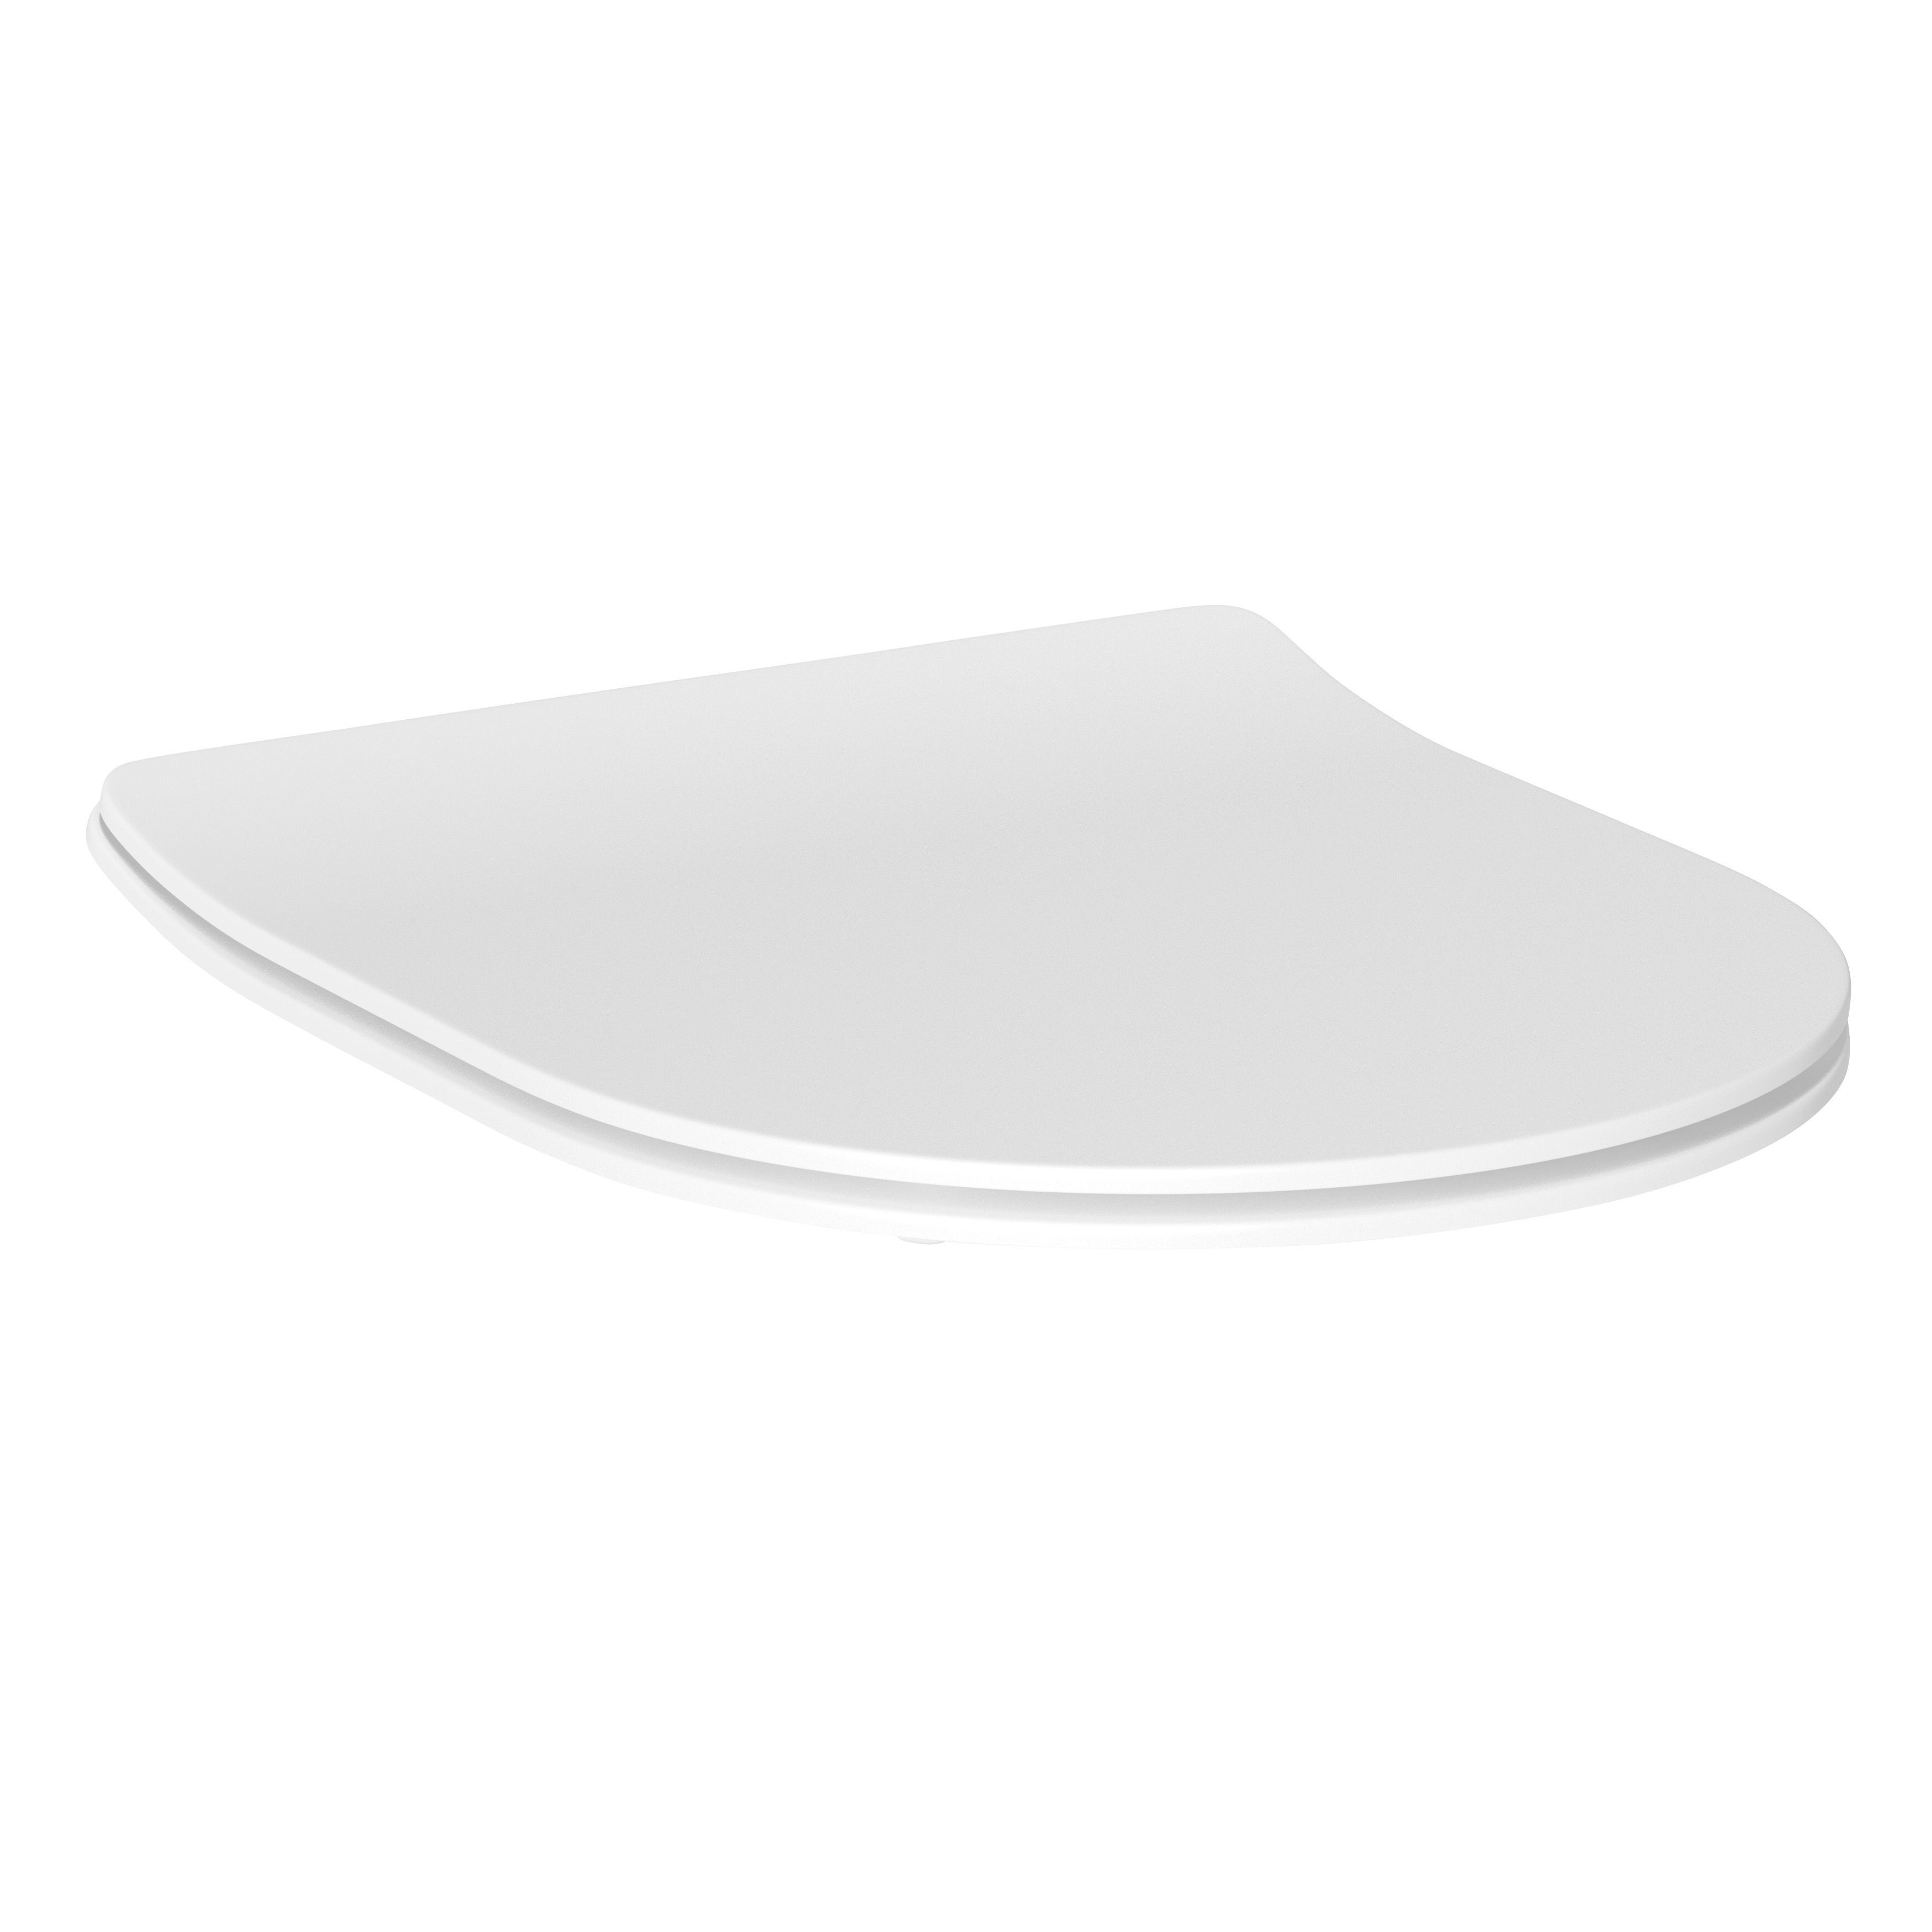 Cooke & Lewis Helena White Soft close Toilet seat | Departments | DIY